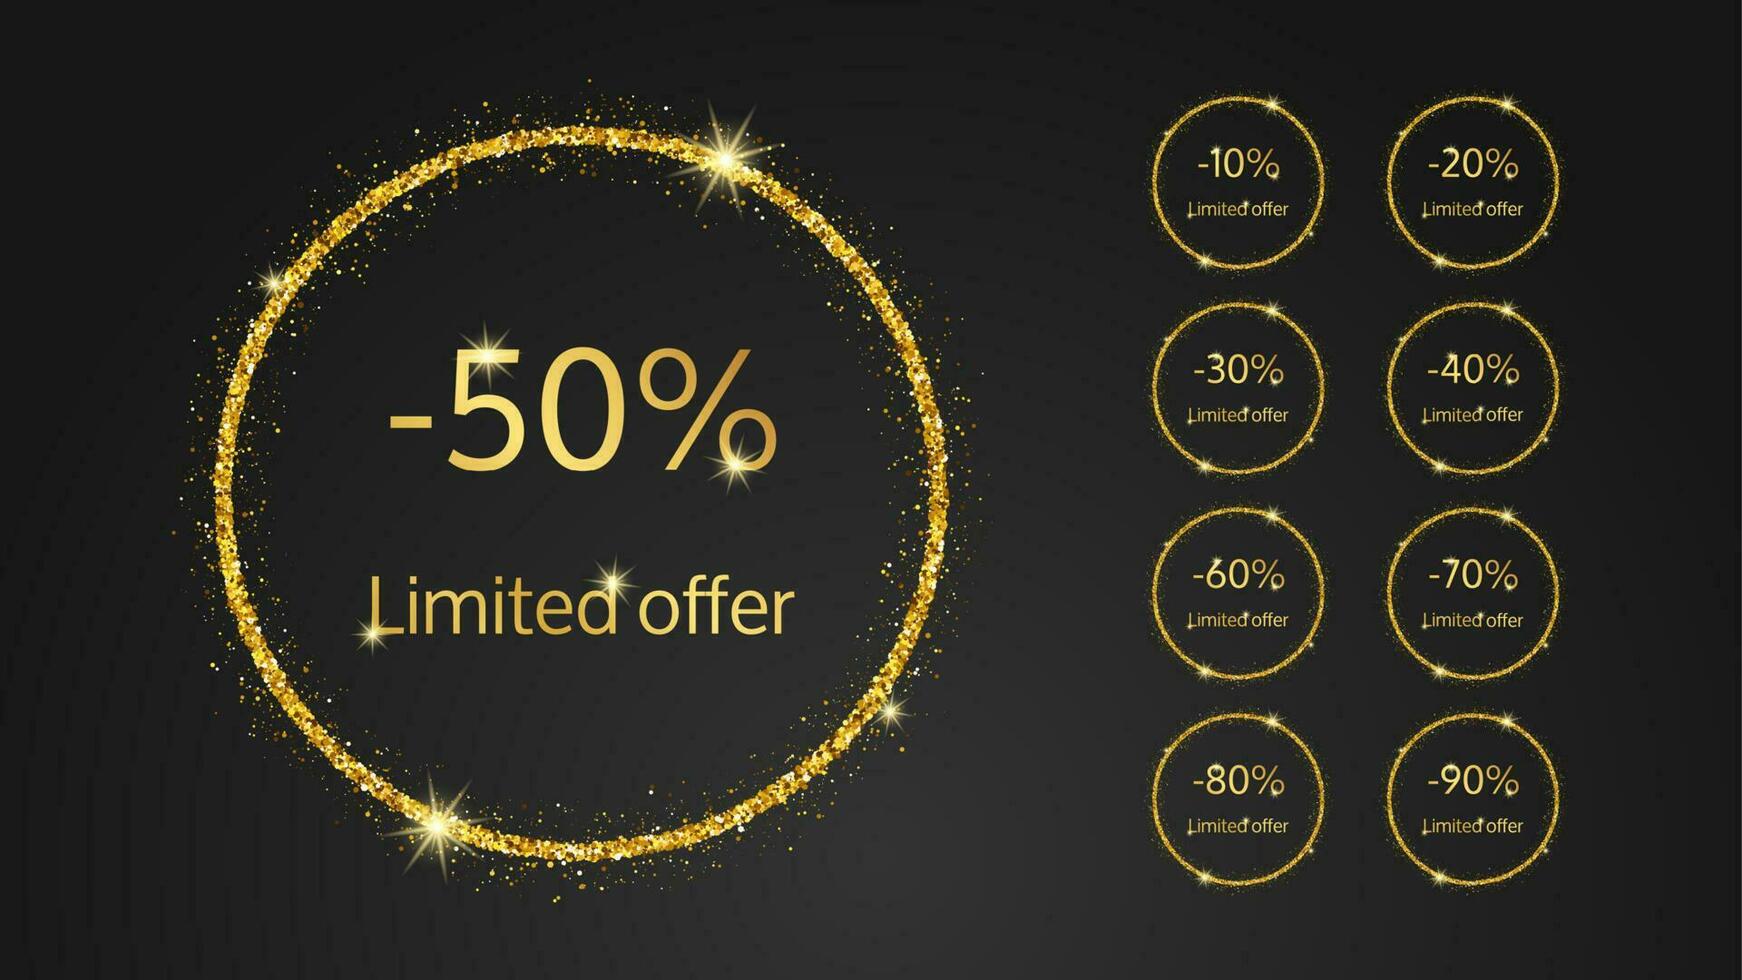 Set of nine limited offer gold banner with different percentages of discounts from 10 to 90. Gold numbers in gold glittering circle on dark background. Vector illustration